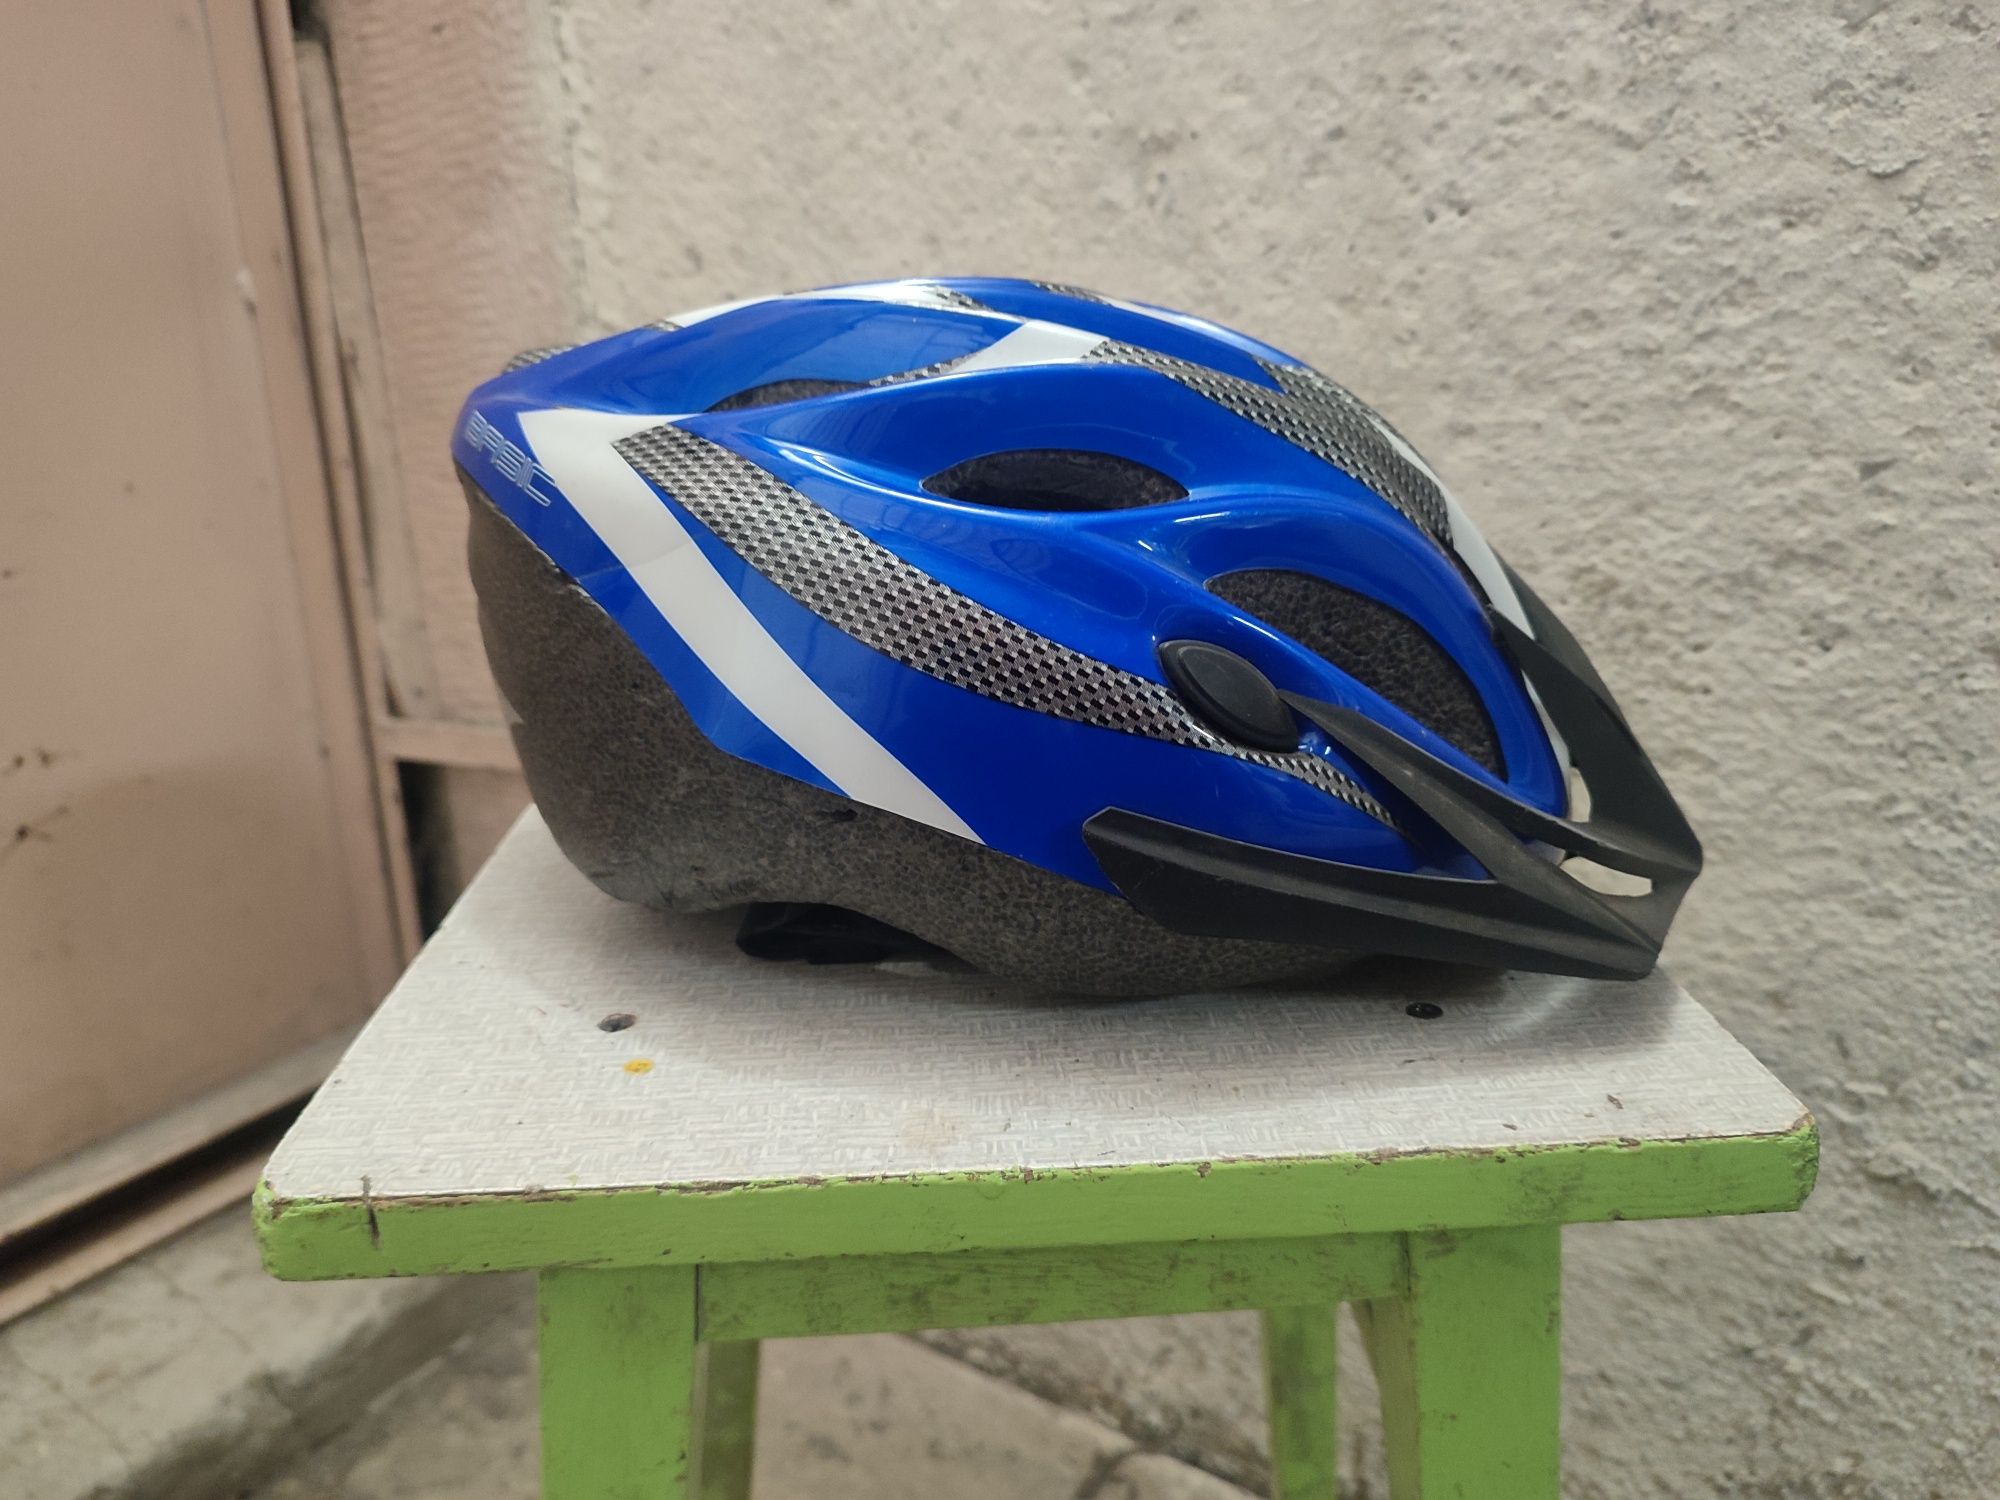 Kask rowerowy author Basic